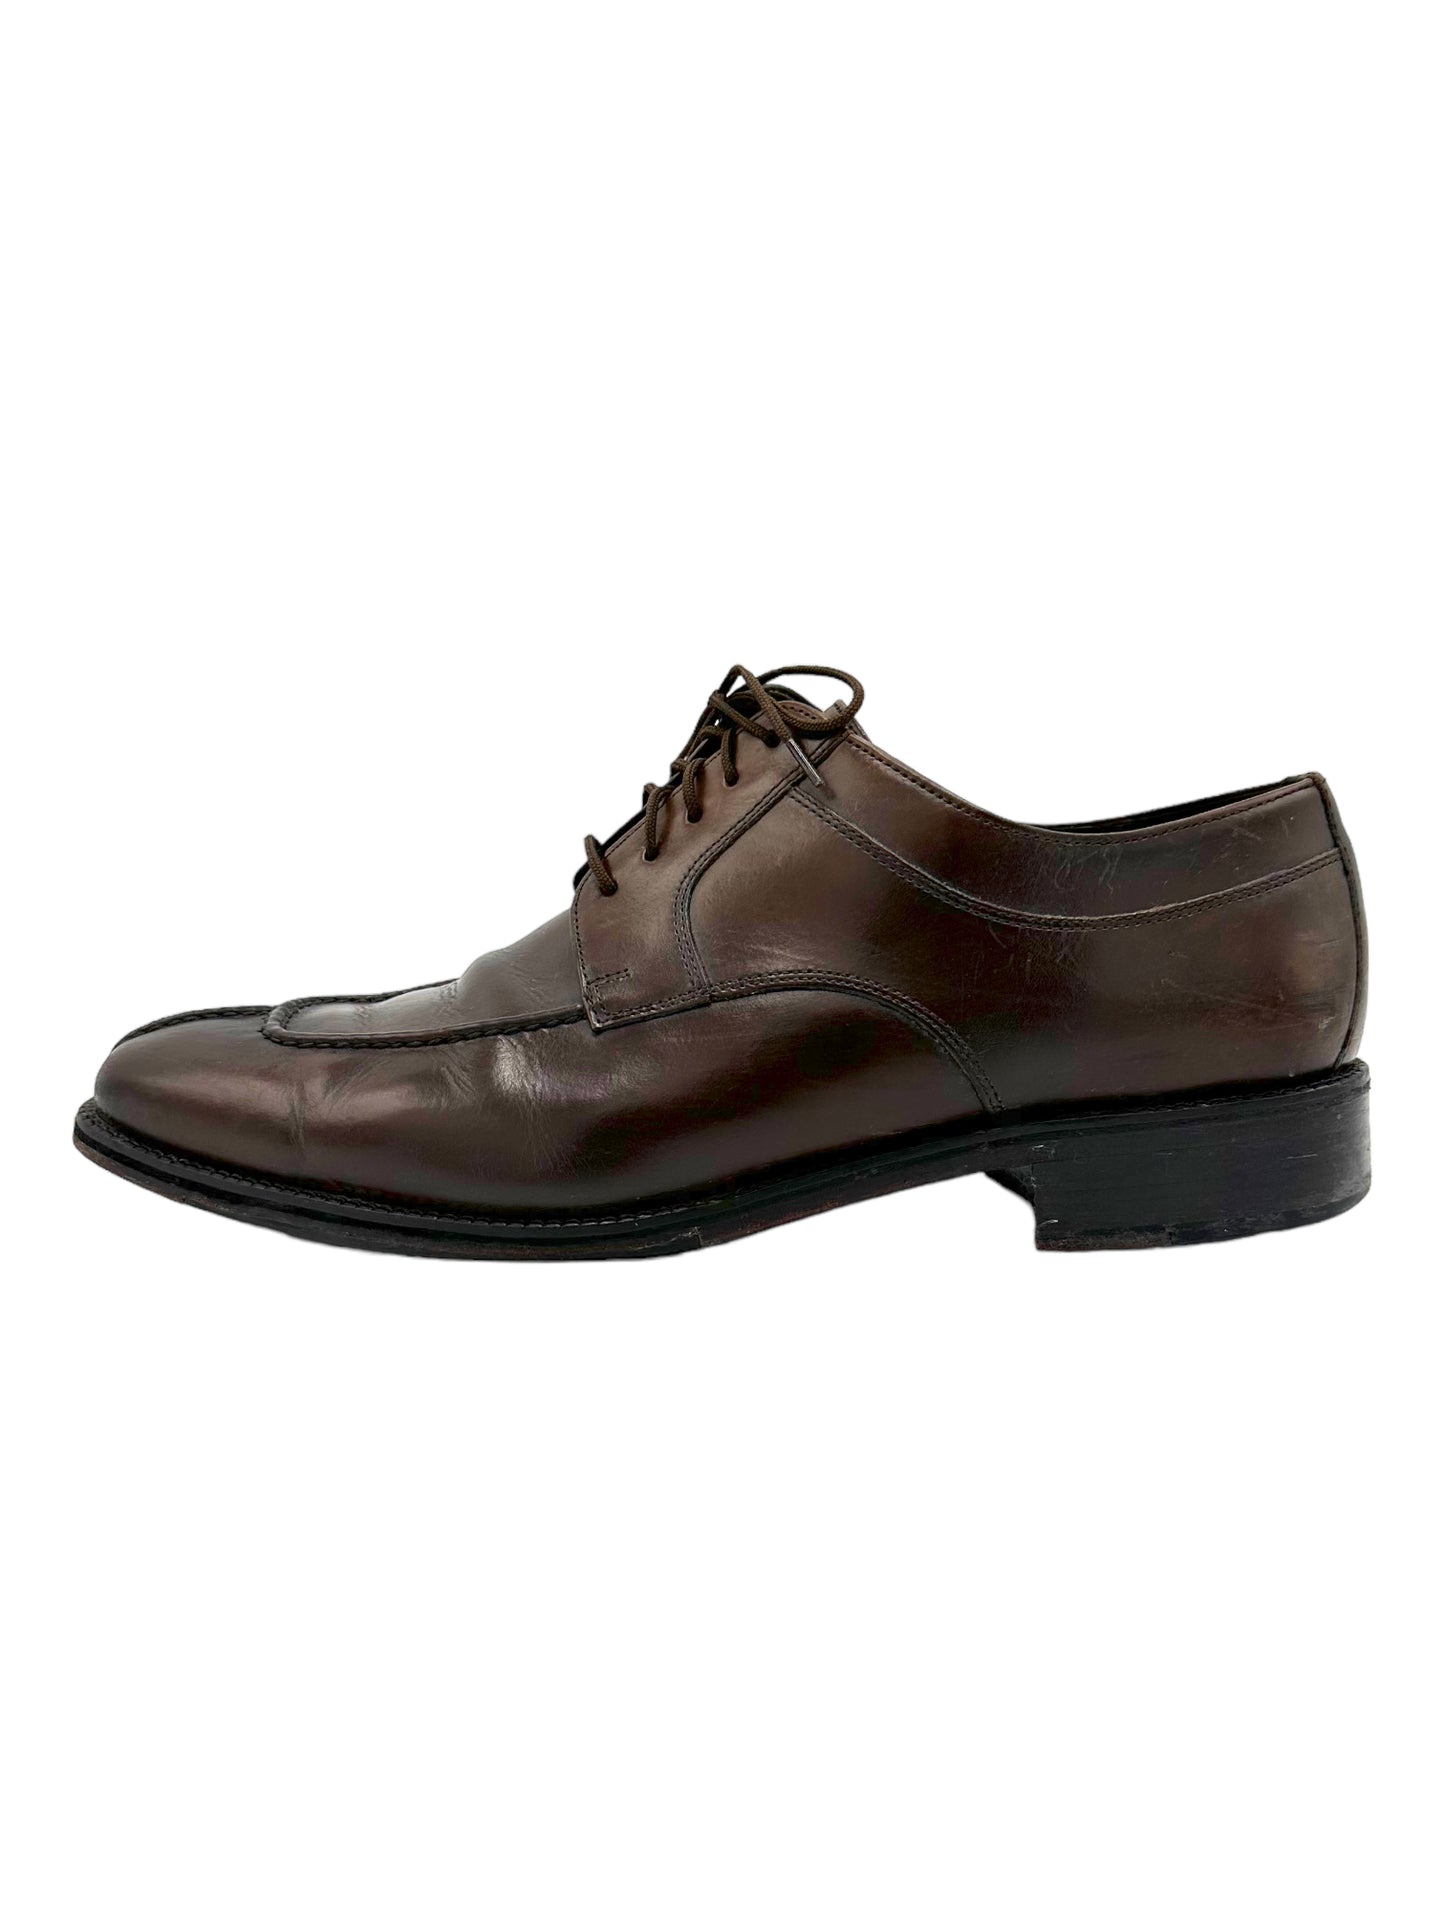 Cole Haan Brown Leather Split Toe Oxford Dress Shoe - Genuine Design luxury consignment Calgary, Canada New and pre-owned clothing, shoes, accessories.